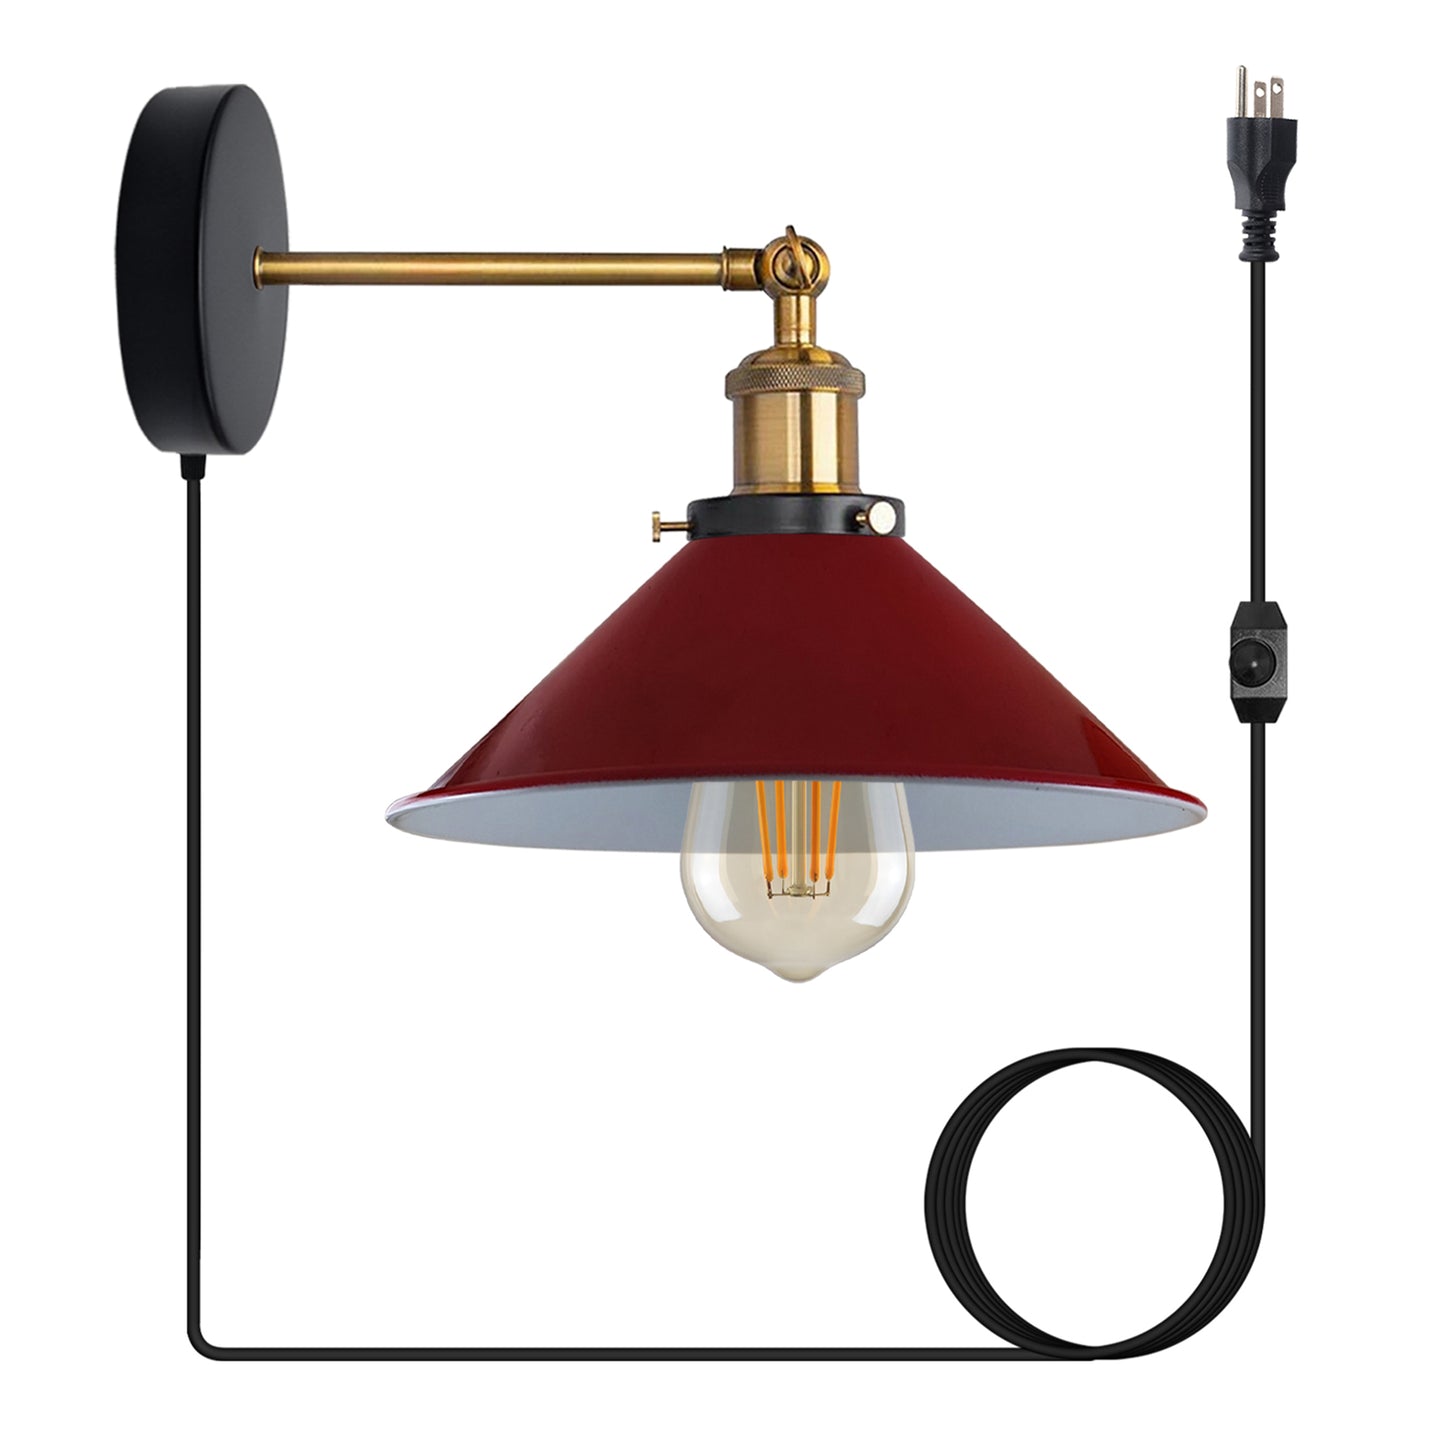 Red Plug-in Wall Light Sconces with Dimmer Switch.JPG